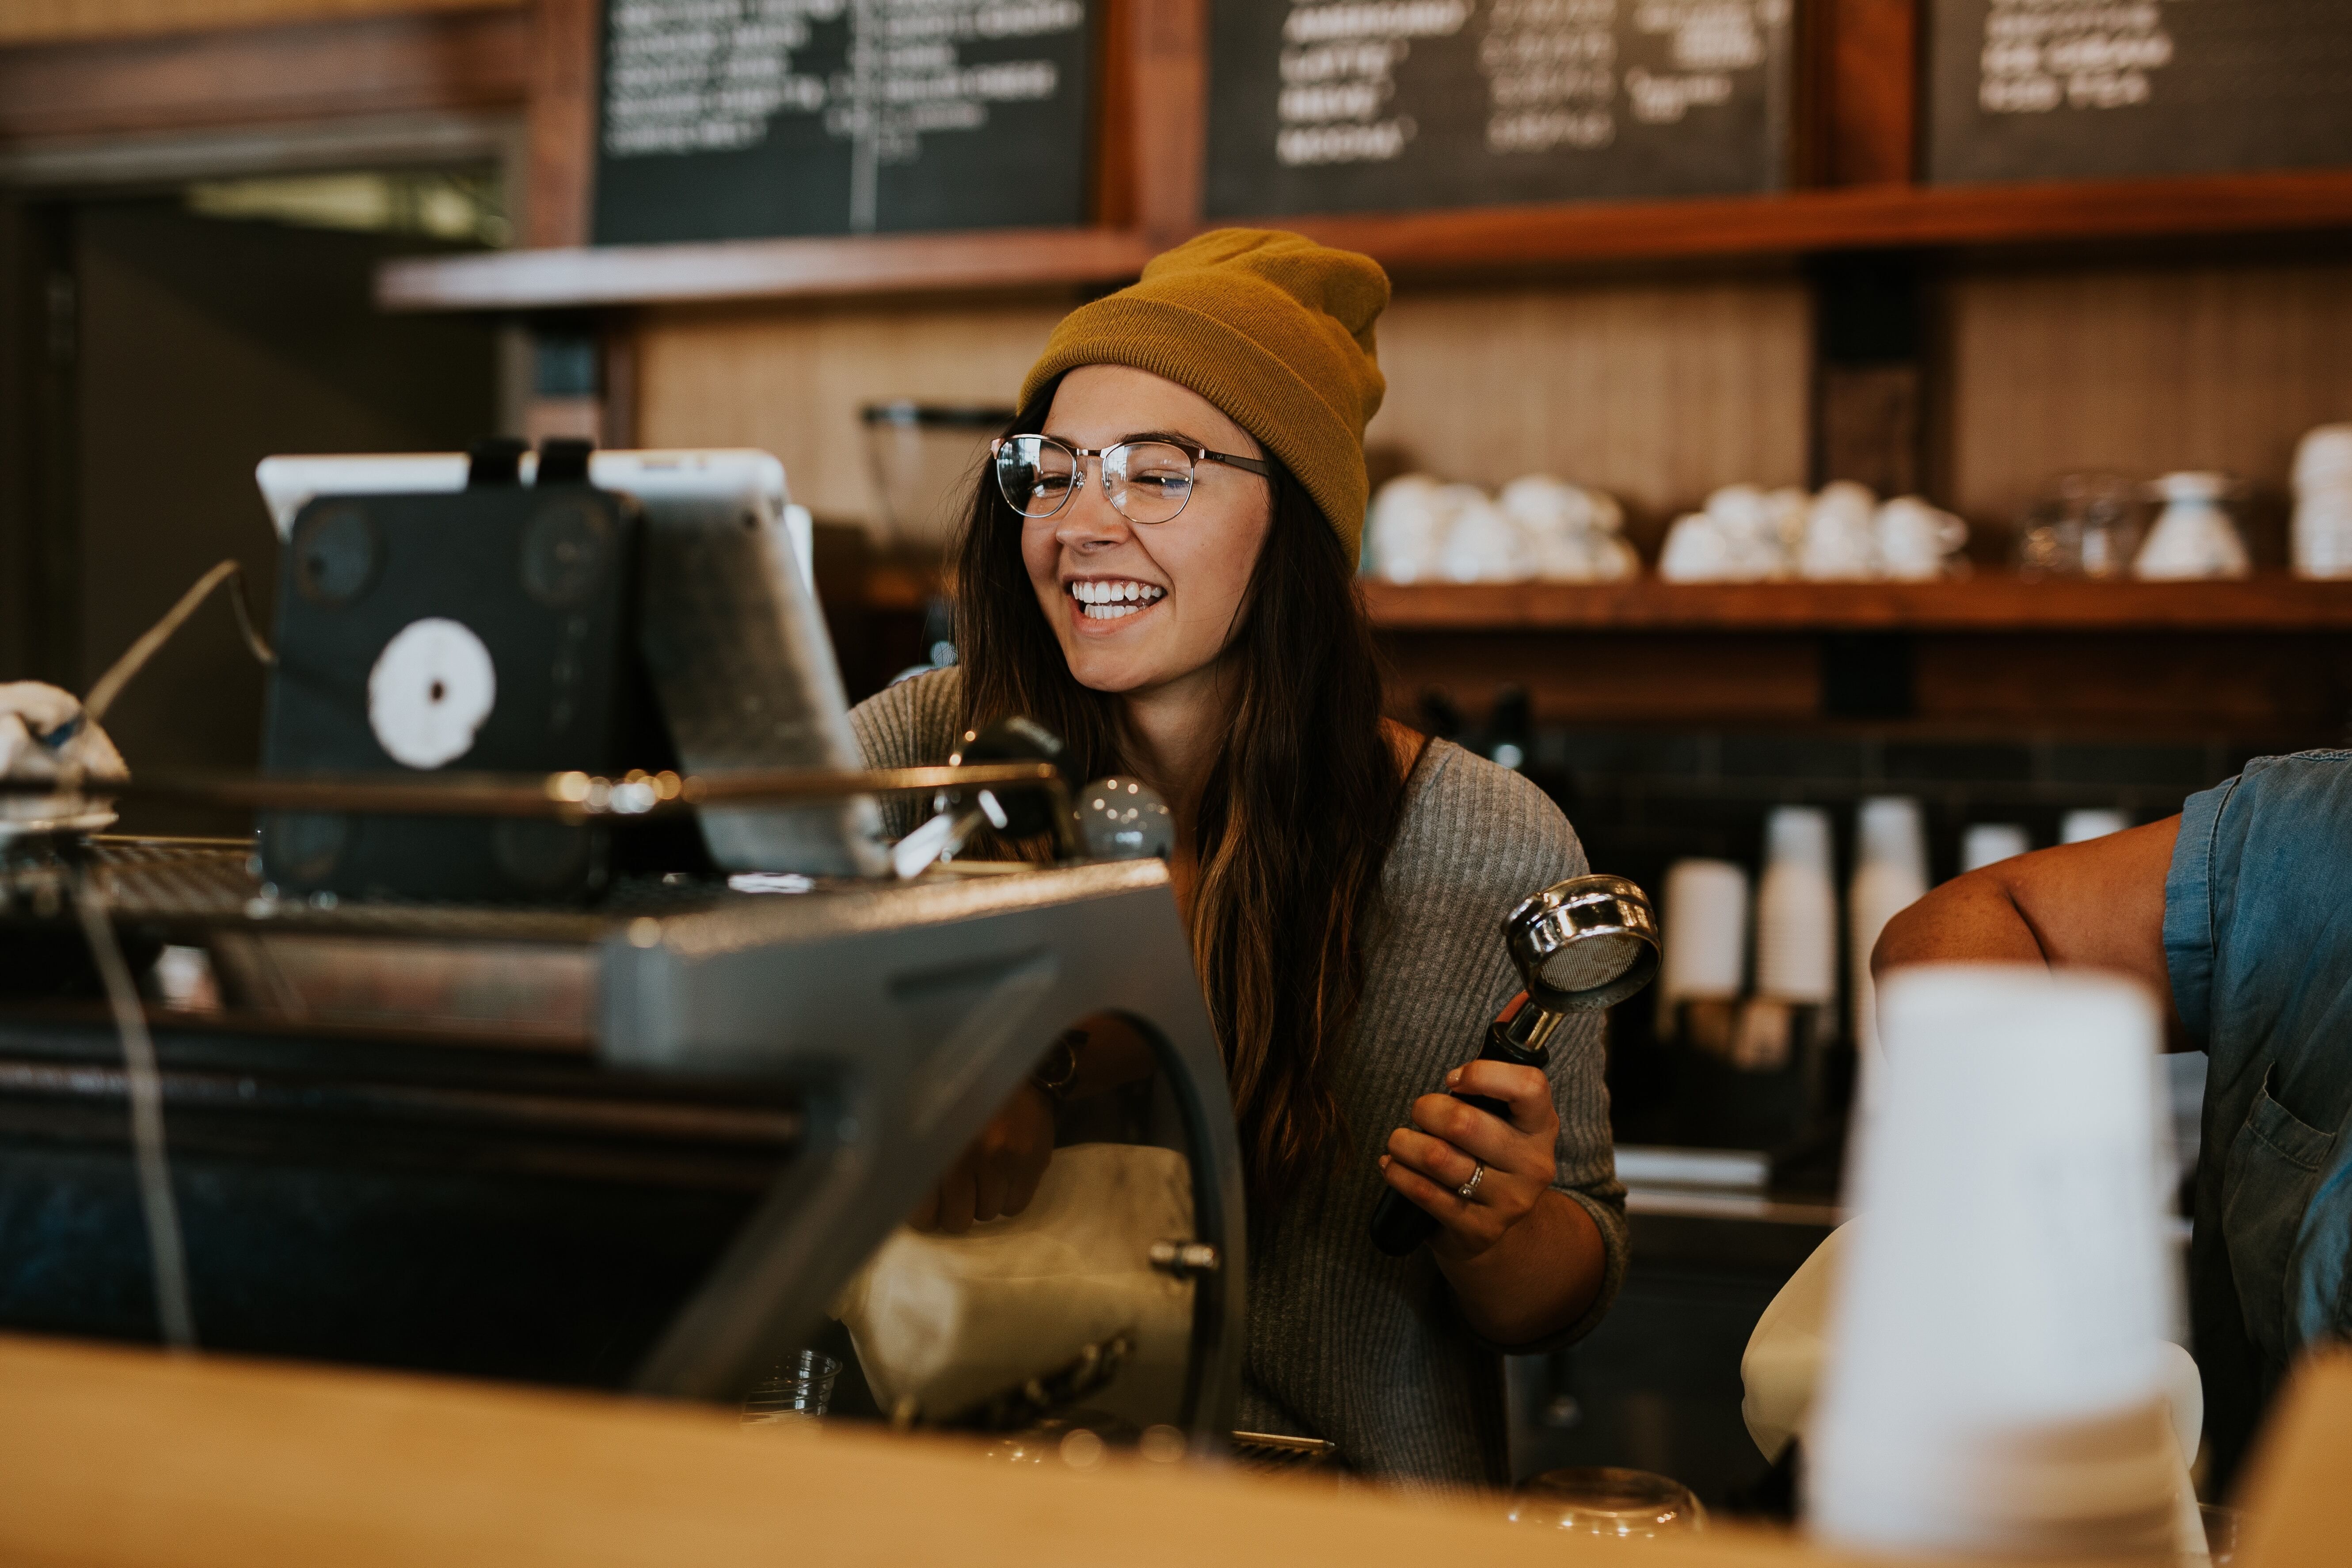 Young lady wearing glasses and a hat preparing someone's coffee order.